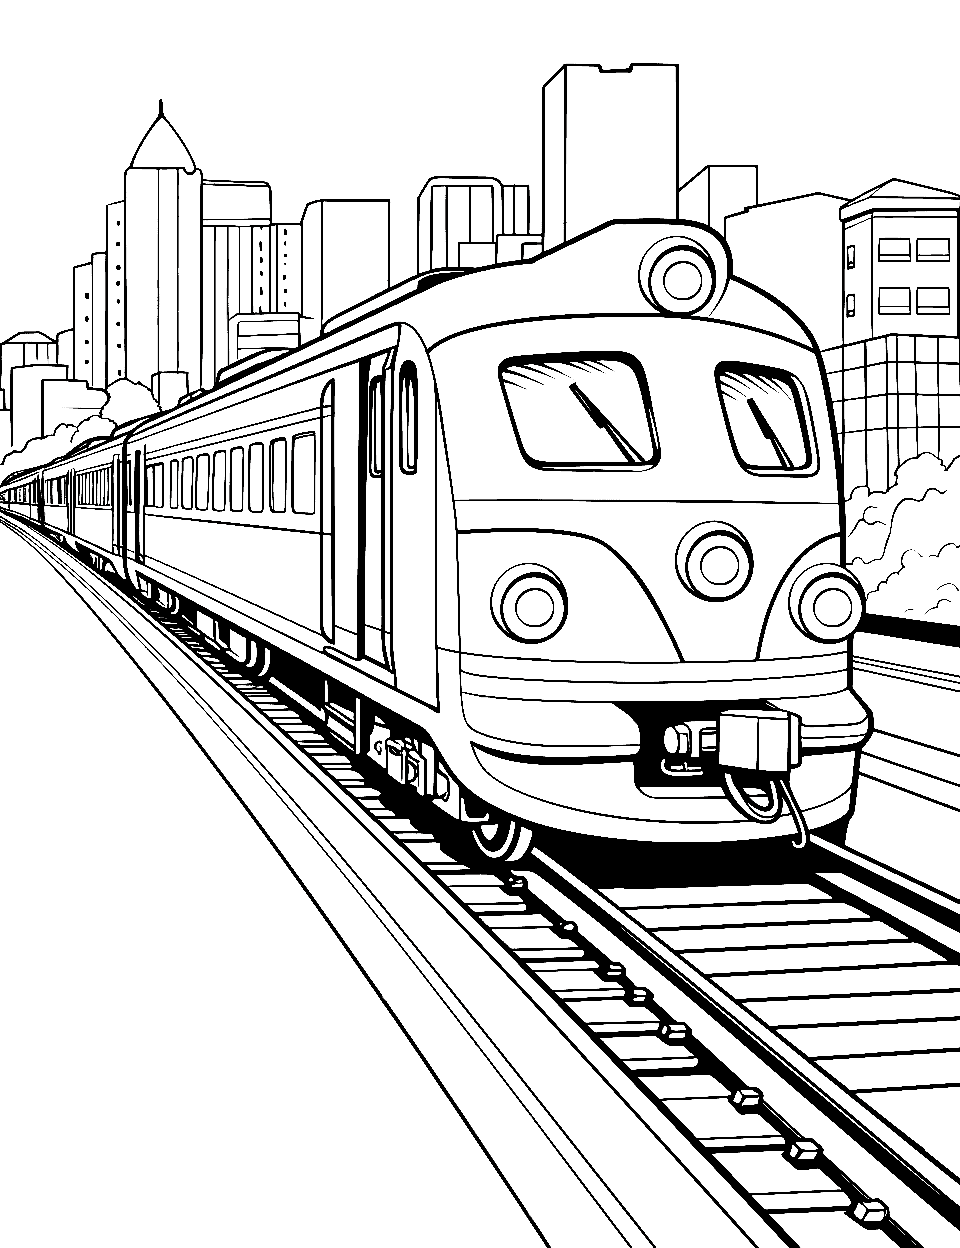 Rapid Transport in the City Train Coloring Page - A high-speed train dashing through a modern city.